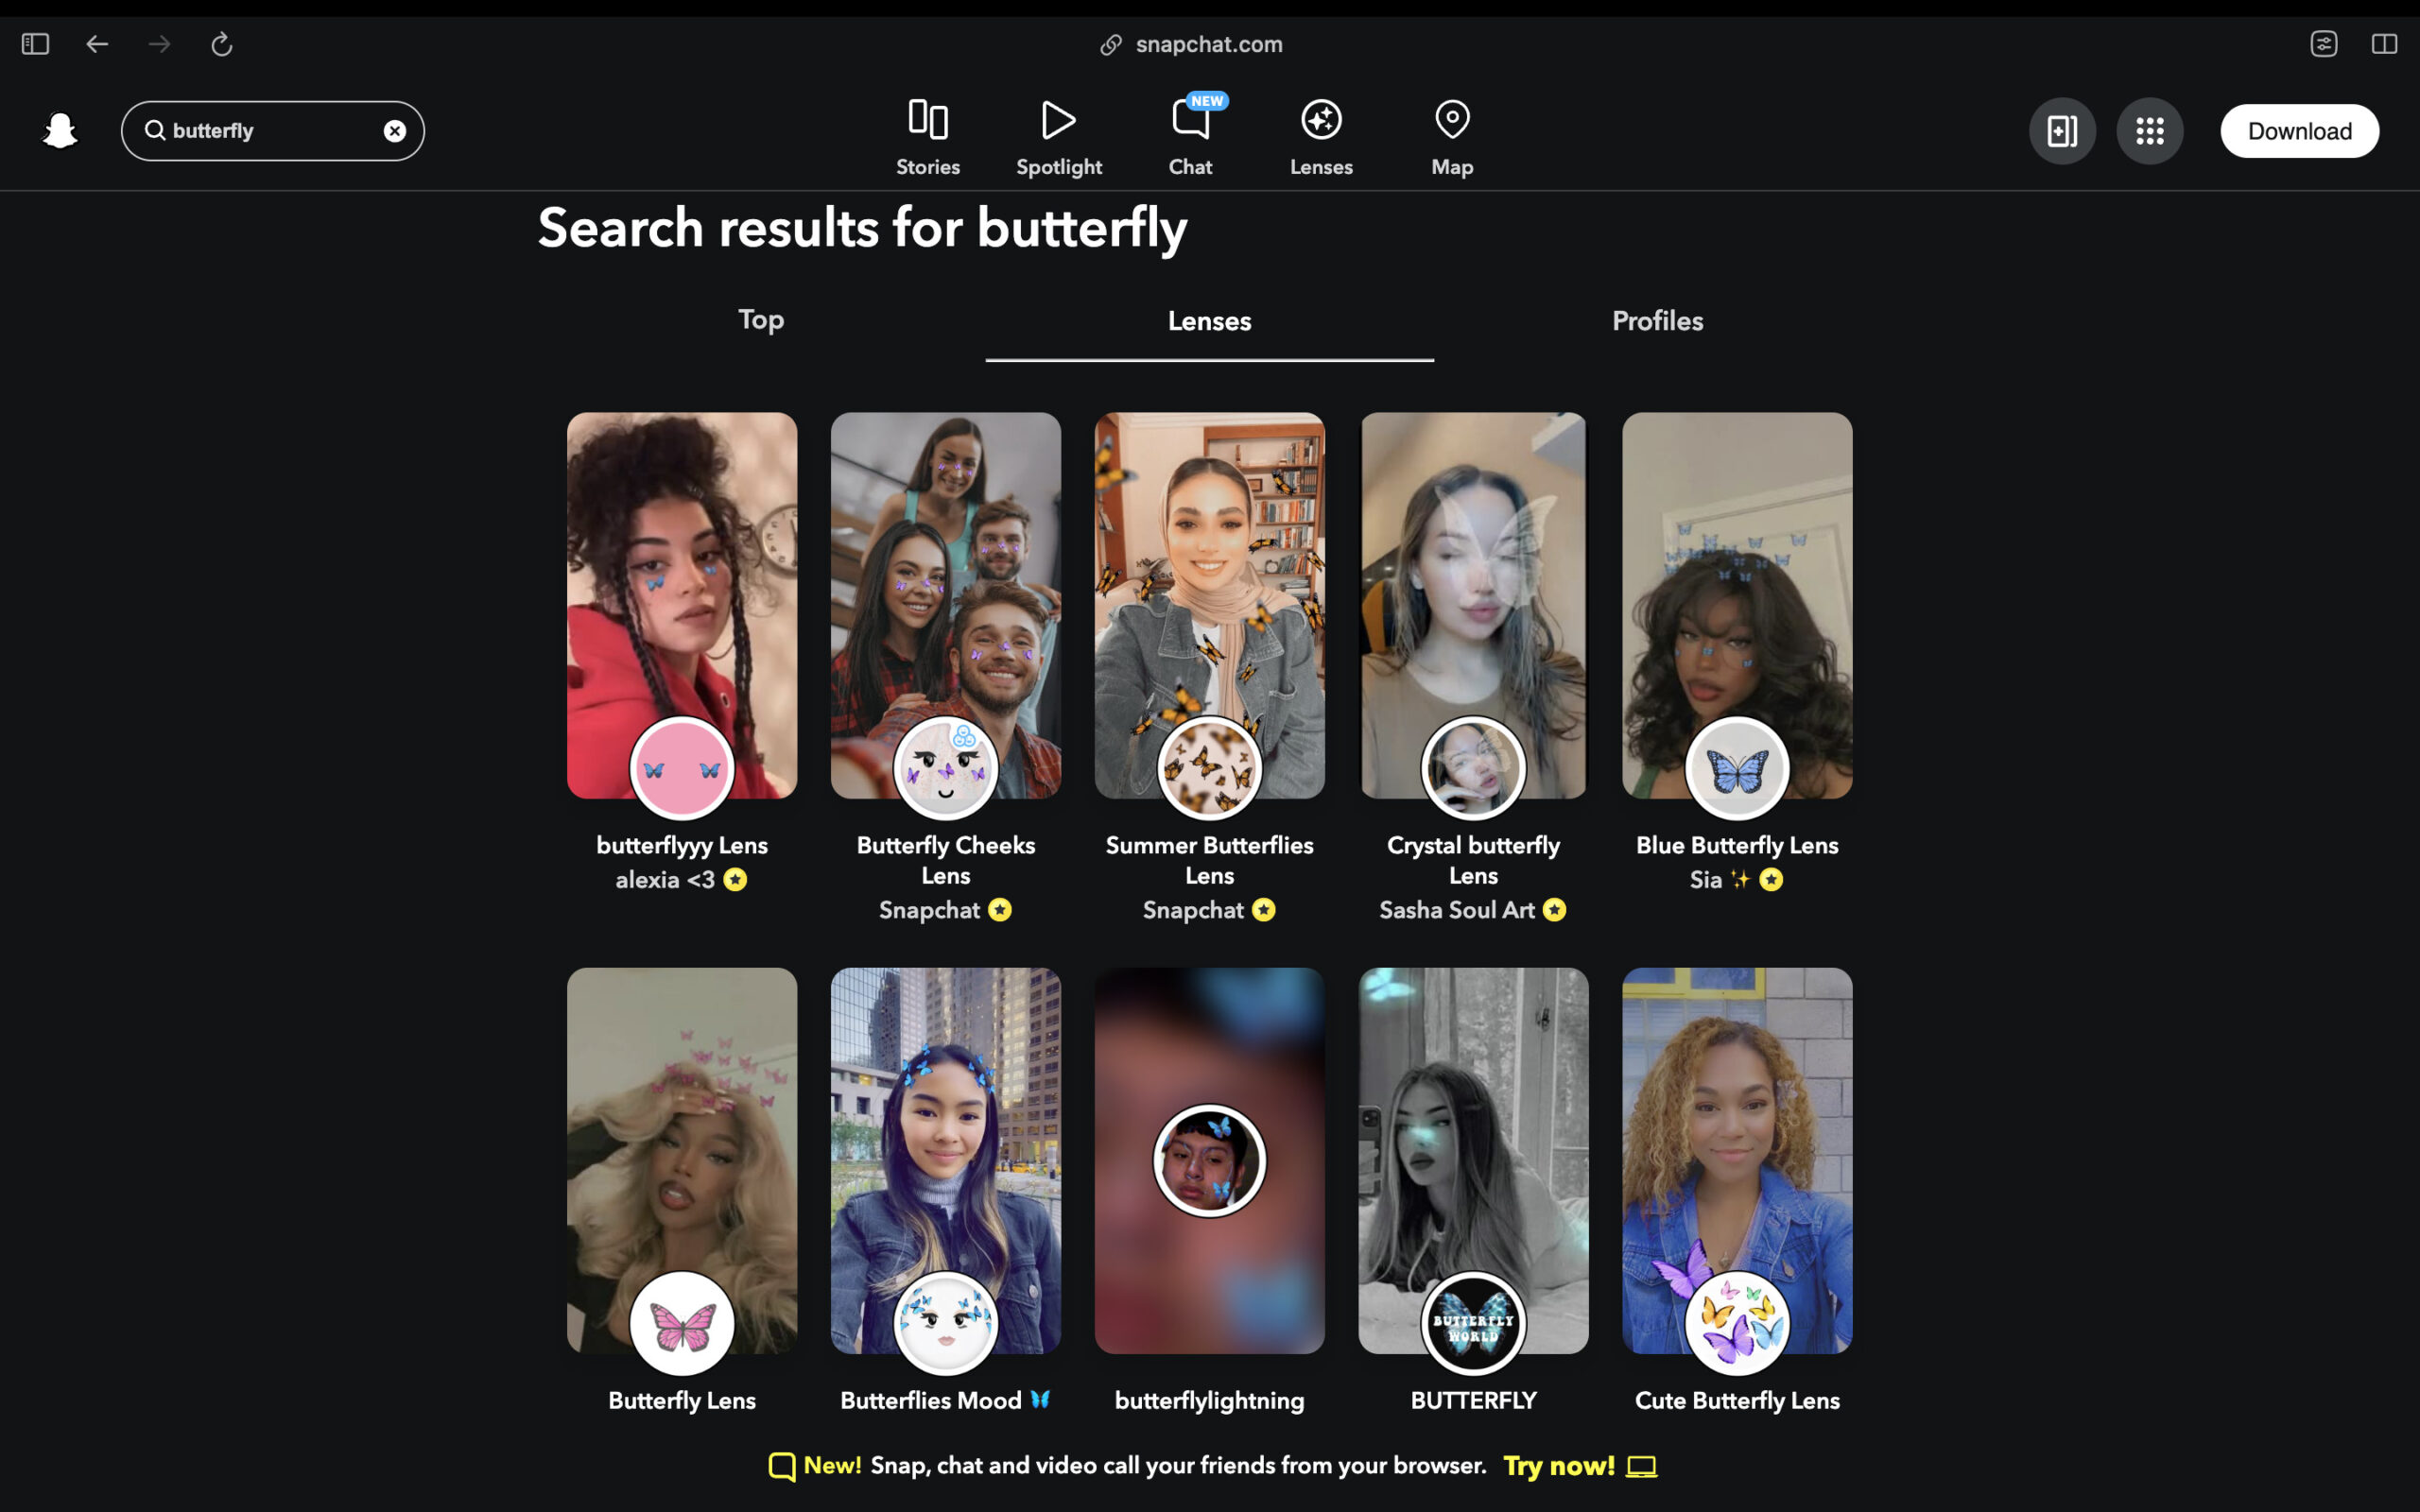 Do a manual search and Unlock the Butterflies Lens on Snapchat